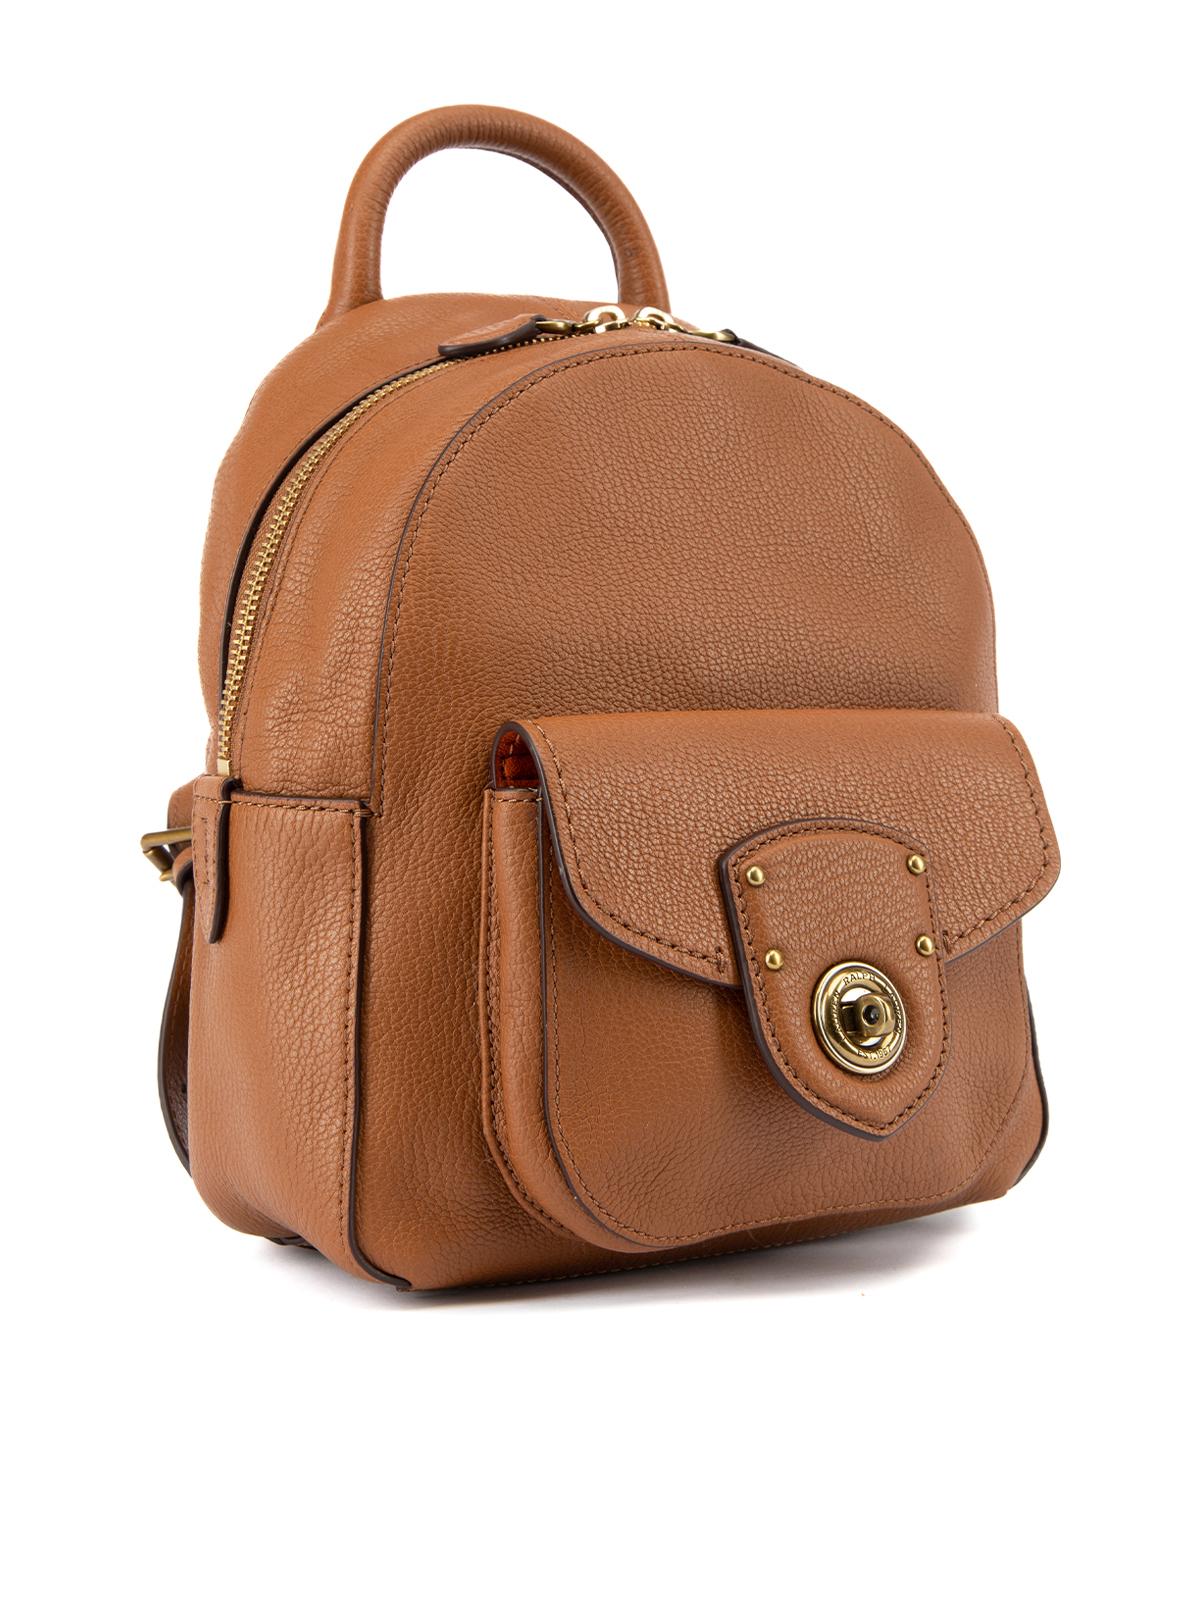 CONDITION is Very good. Hardly any visible wear to bag is evident. There is some creasing to the bag from us on this used Ralph Lauren designer resale item. This item comes with the original dust bag. Details Brown Leather Mini backpack 1x Top